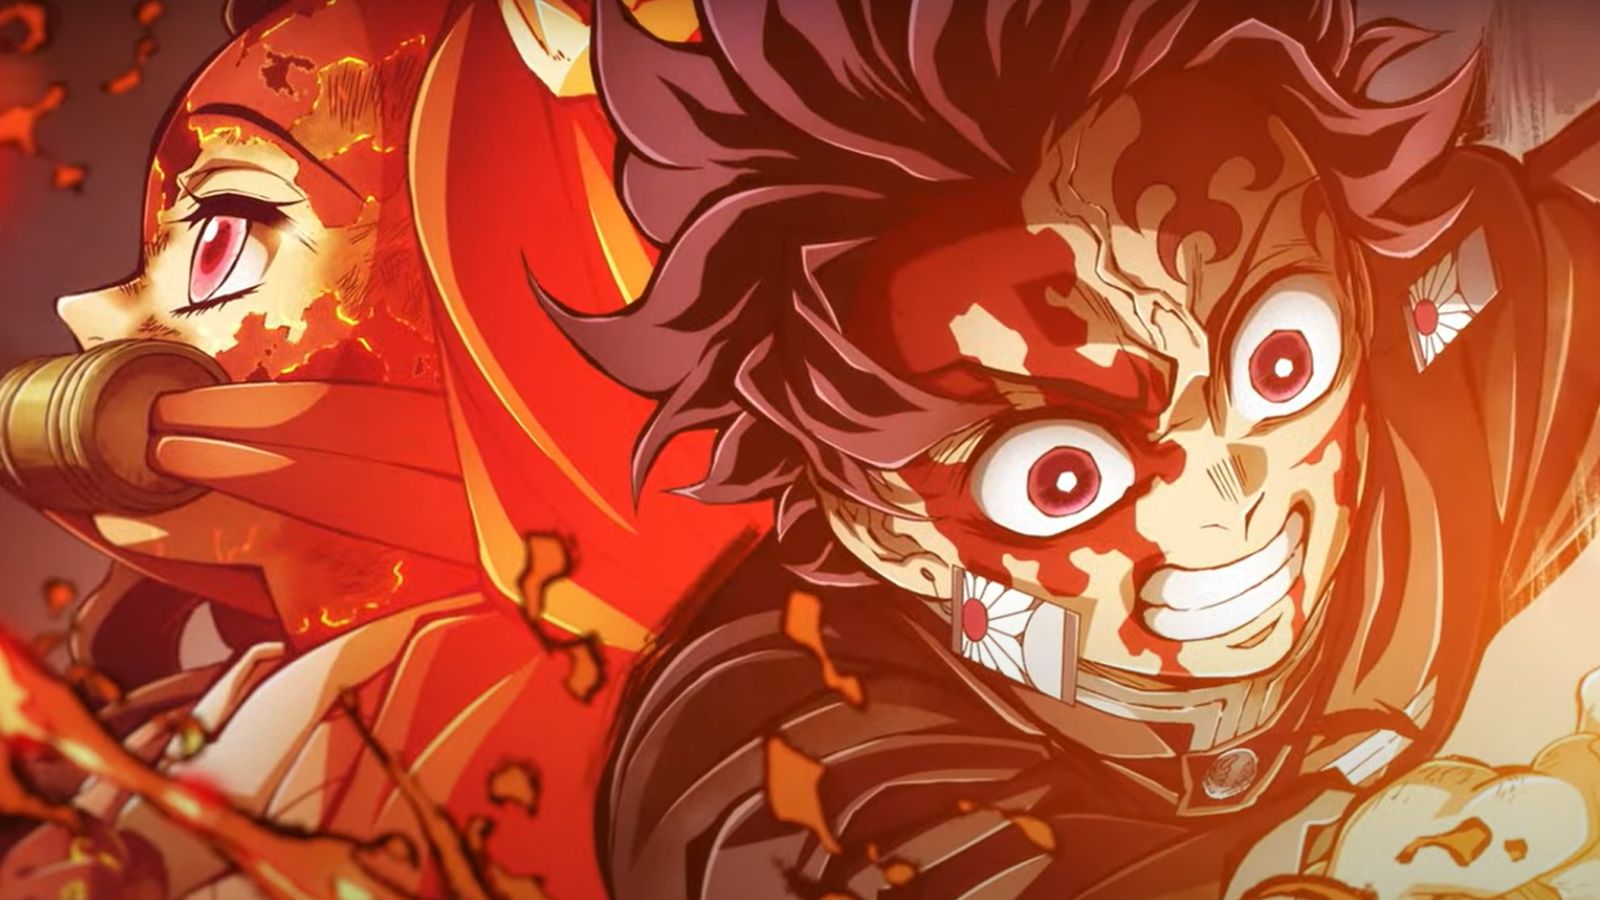 Netflix finally adds the entire Demon Slayer series for streaming